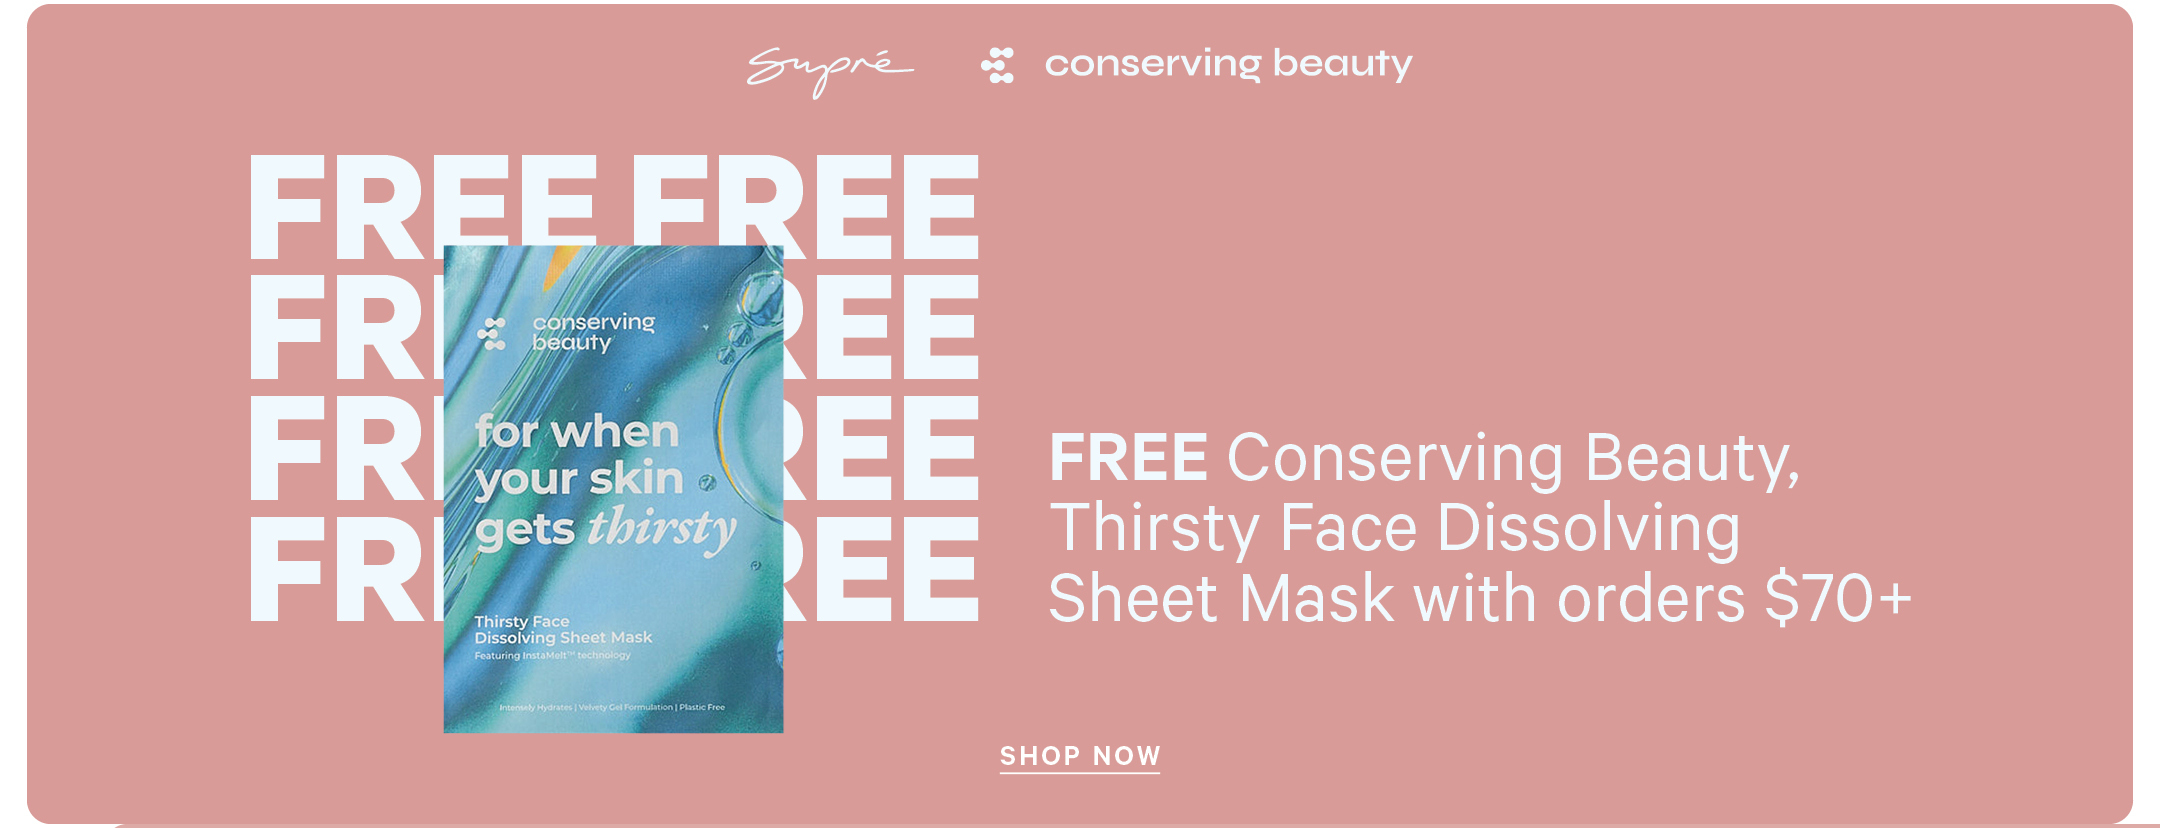 FREE Conserving Beauty Gift With Orders $70+. In Store & Online 